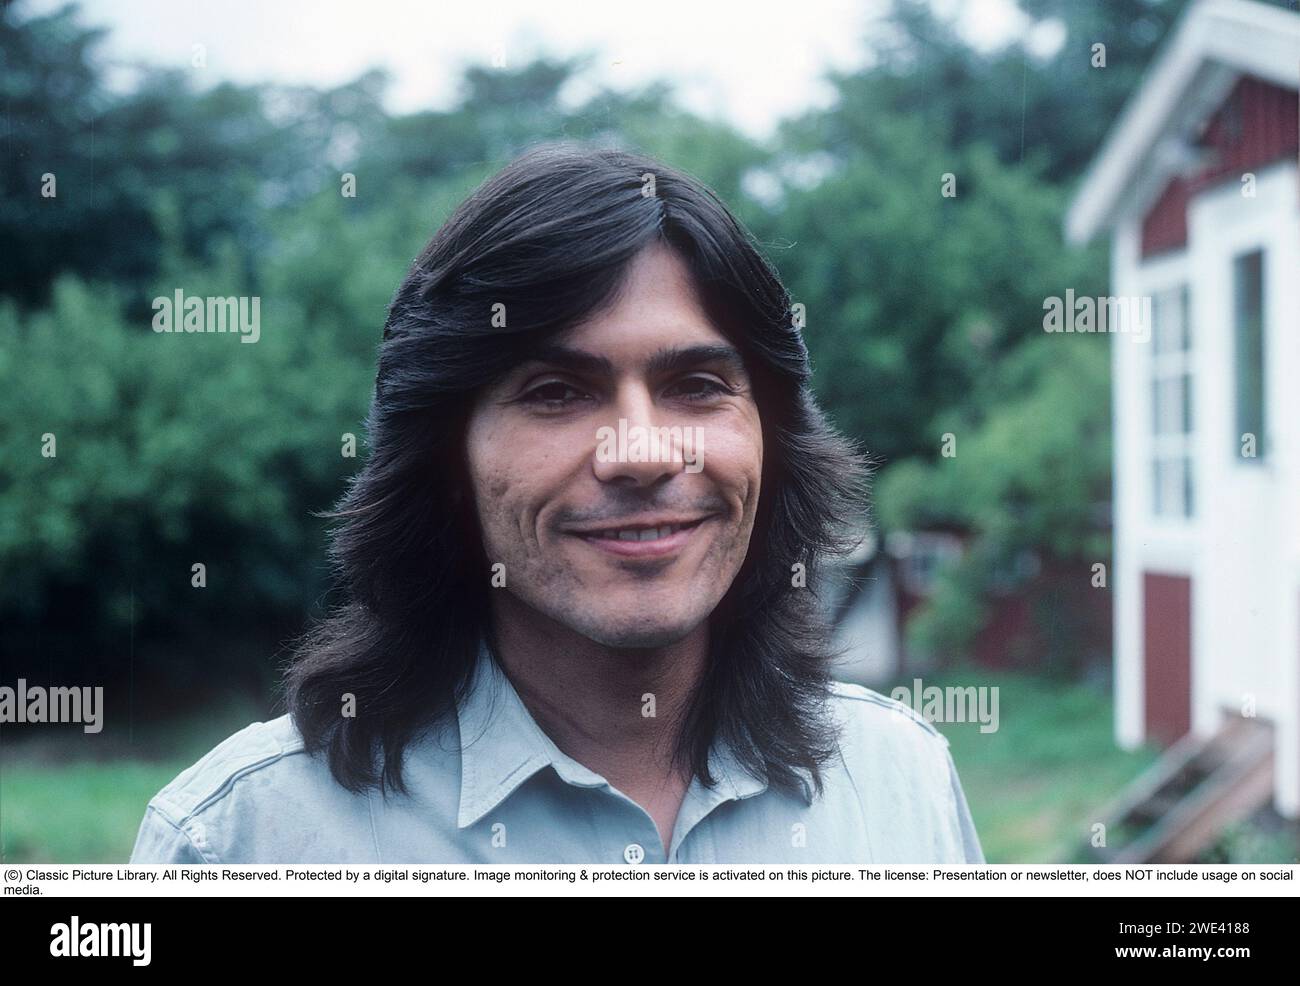 Duane Loken is an American actor and singer, best known for his role as the Indian Wolfpaw in the TV series How the West Was Won or The Macahans. Photographed during a visit to Sweden in July 1985. Stock Photo